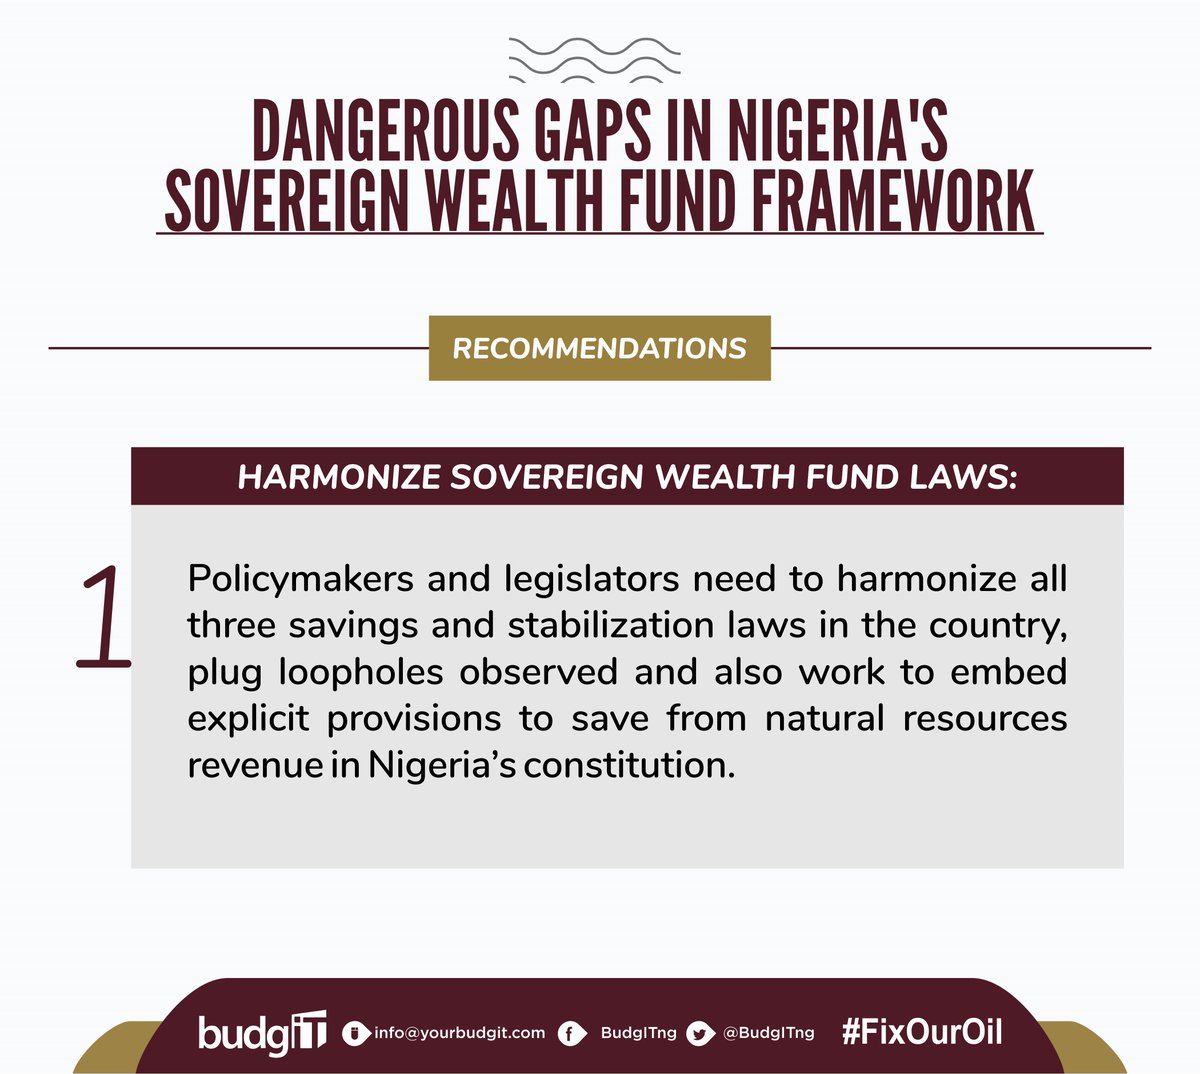 Recommendations1. Harmonize Sovereign Wealth Fund Laws:Policymakers and legislators need to harmonize all three savings and stabilization laws in the country, plug loopholes and work to embed explicit provisions to save from natural resources revenue in Nigeria’s constitution